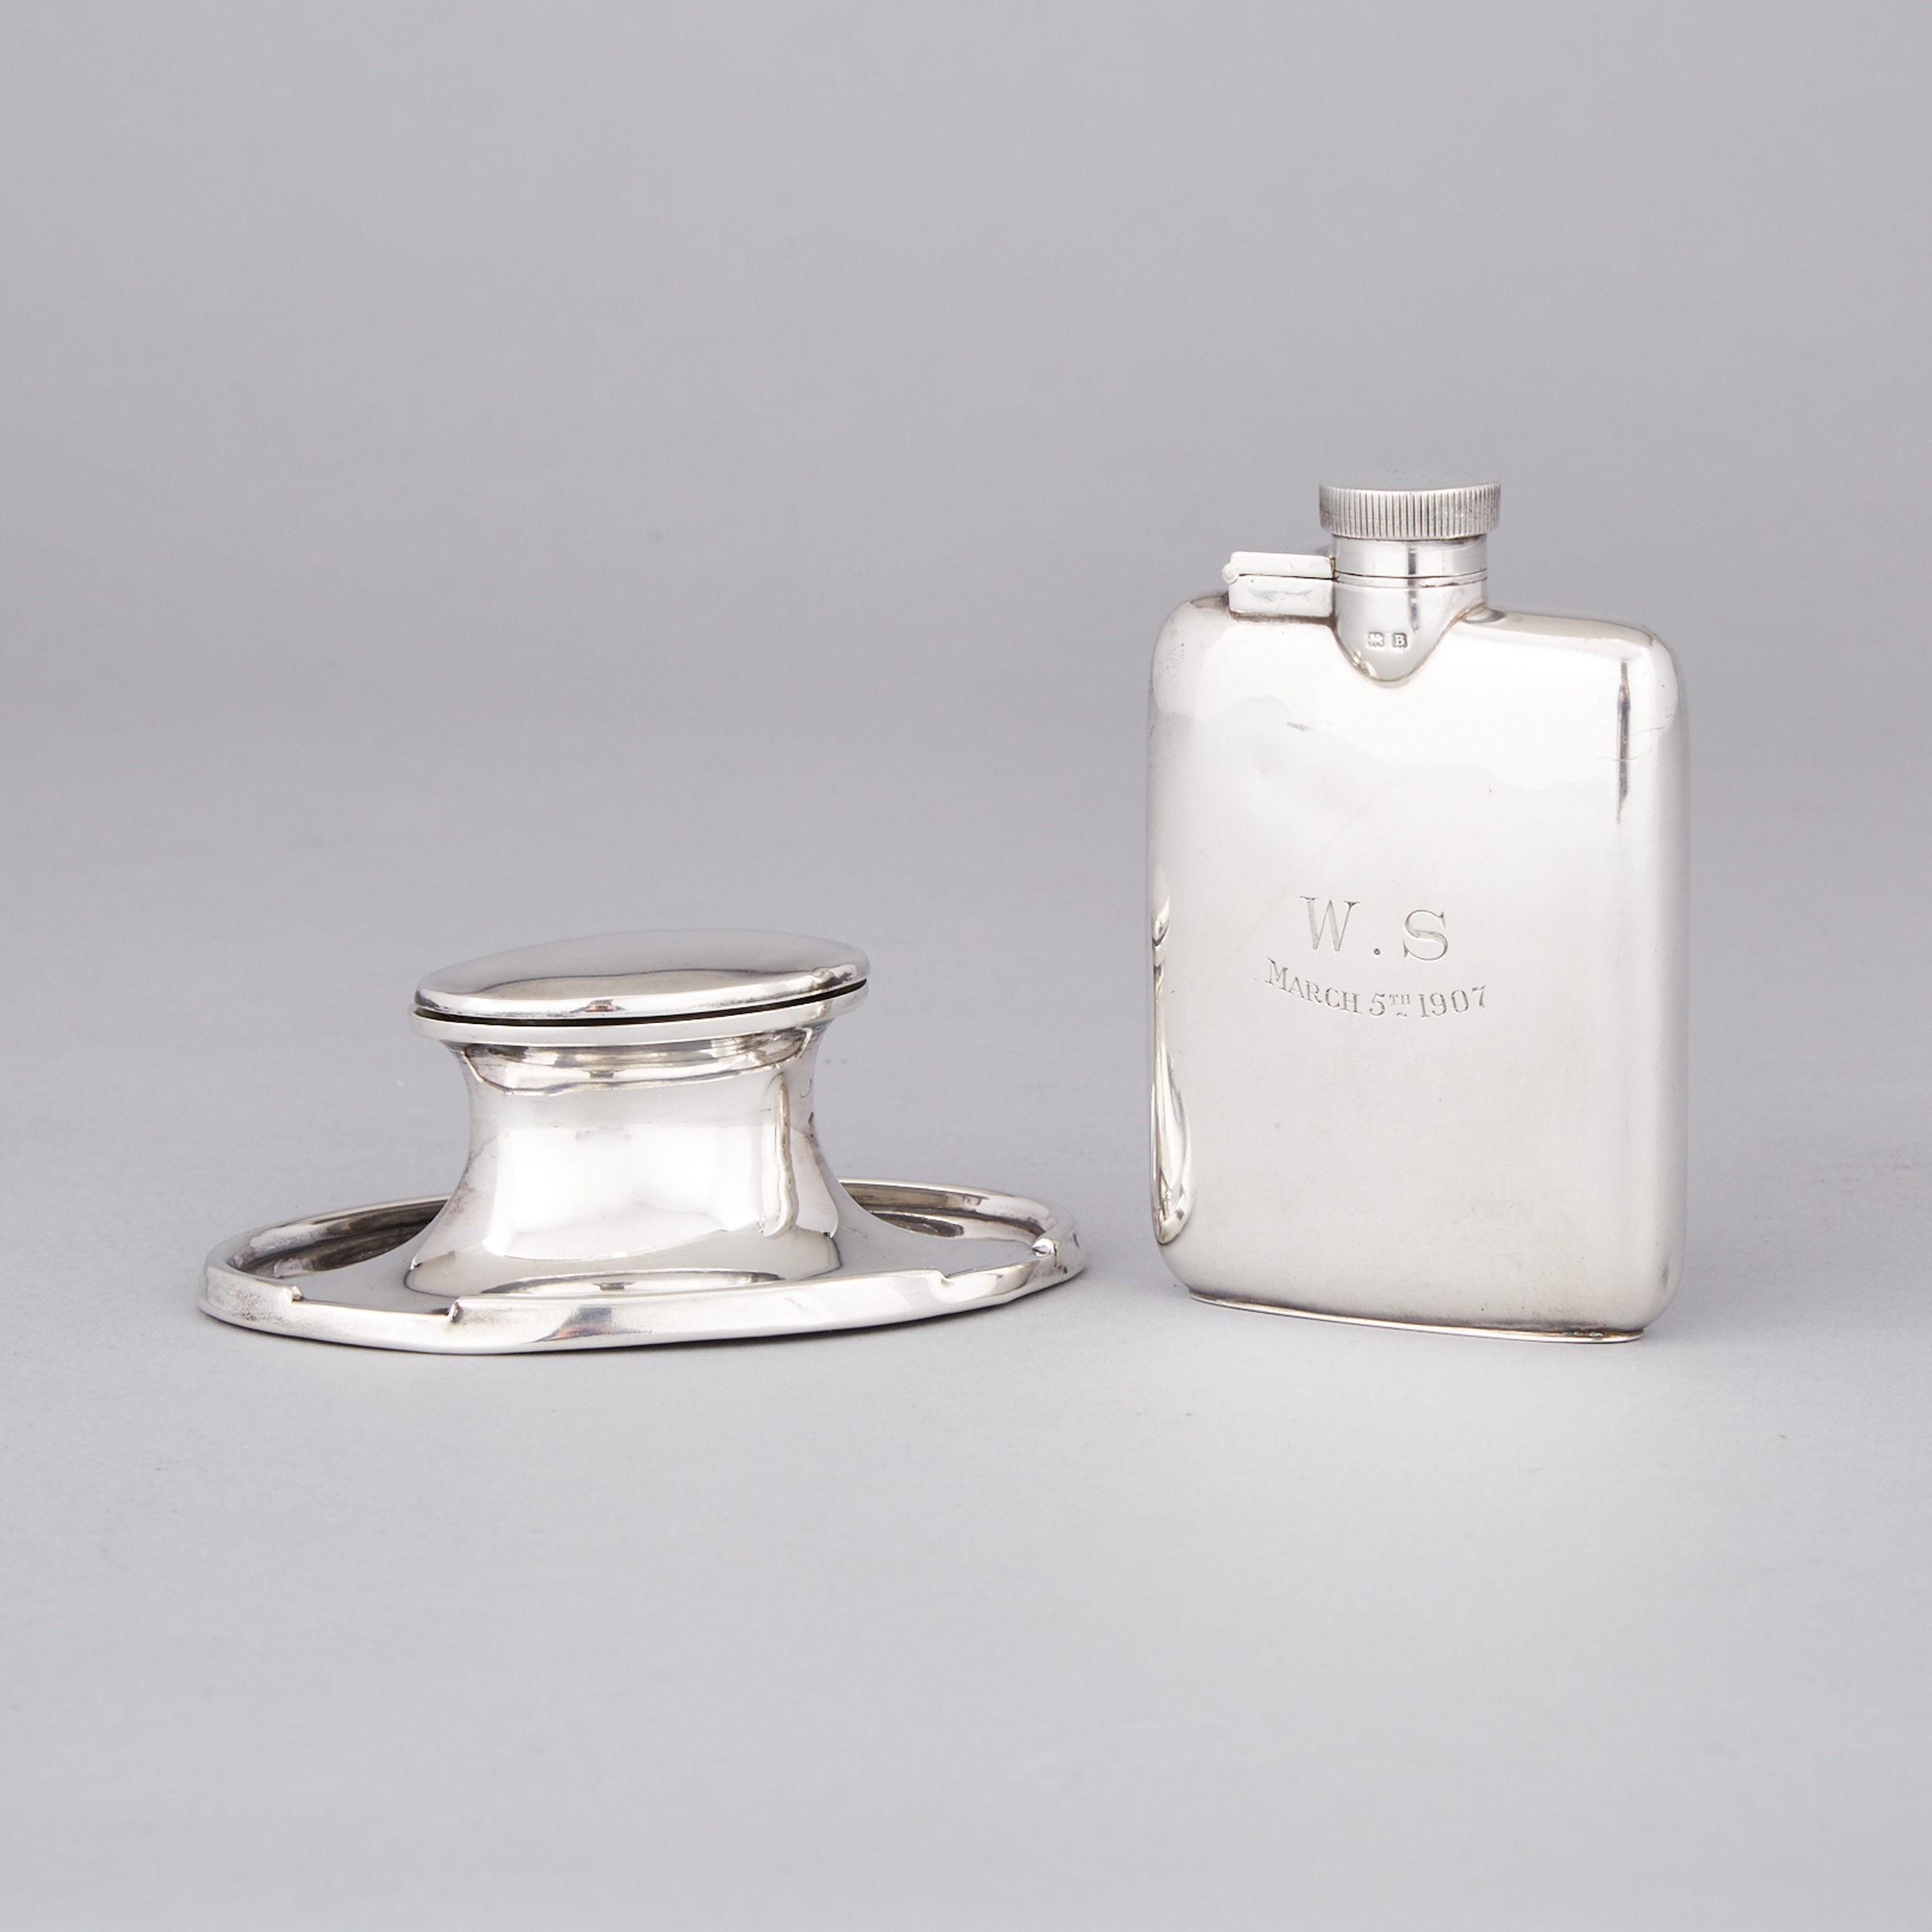 English Silver Inkwell and Spirit Flask, A. & J. Zimmerman and Mappin & Webb, Birmingham, 1912/26